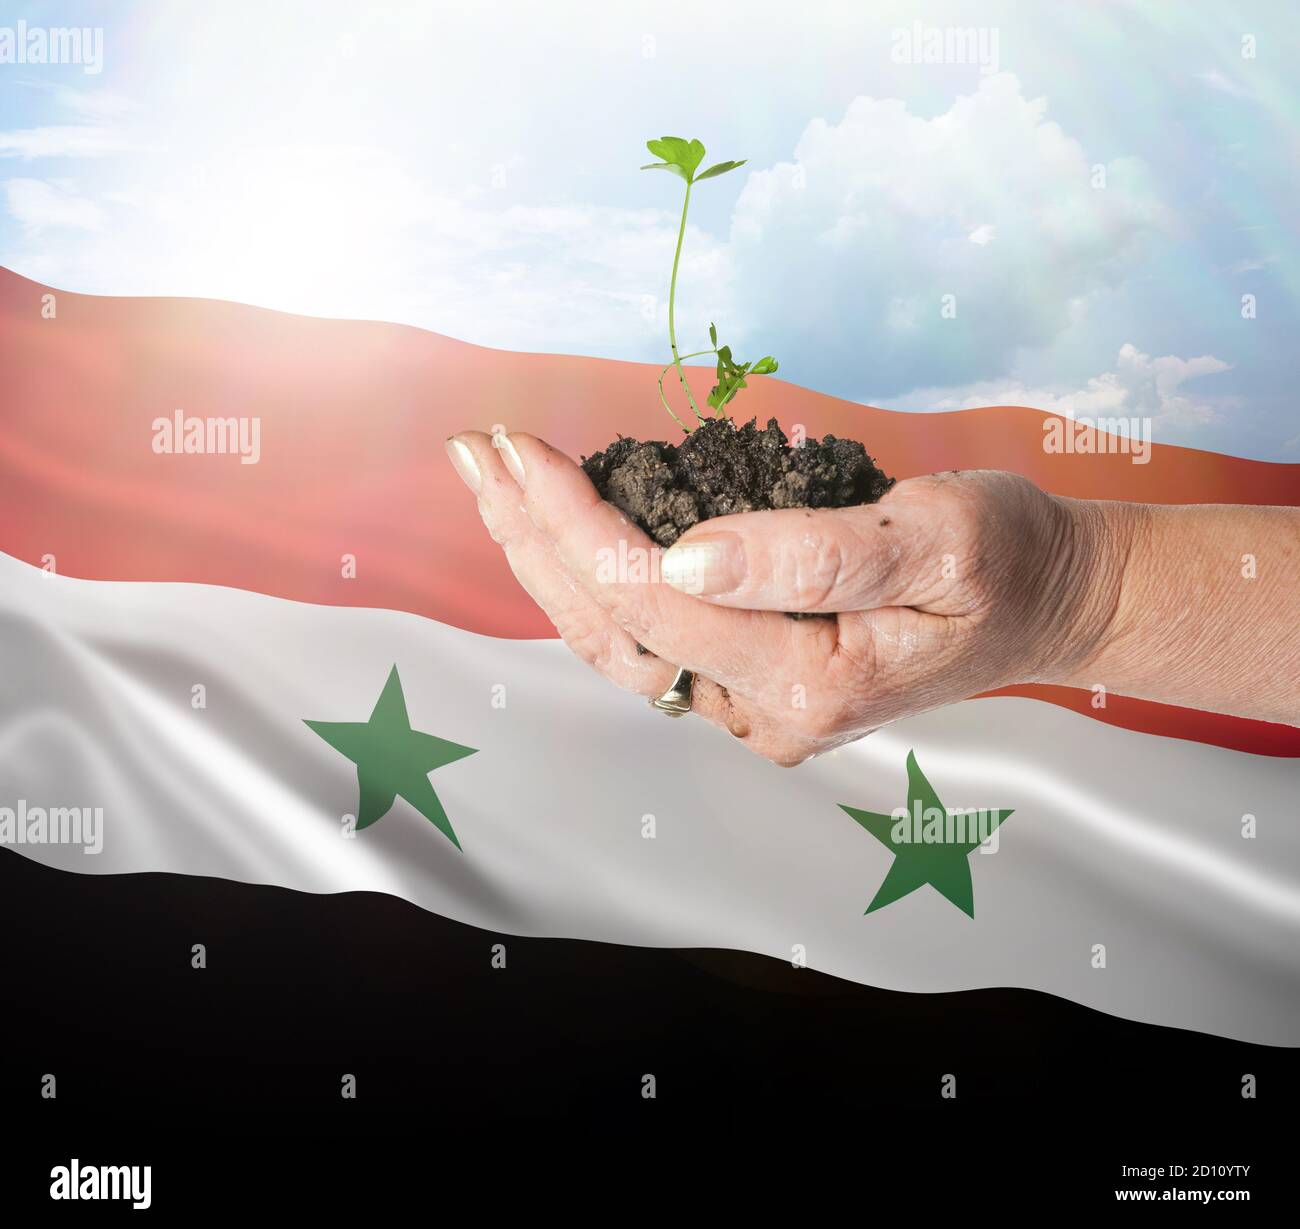 Syria growth and new beginning. Green renewable energy and ecology concept. Hand holding young plant. Stock Photo